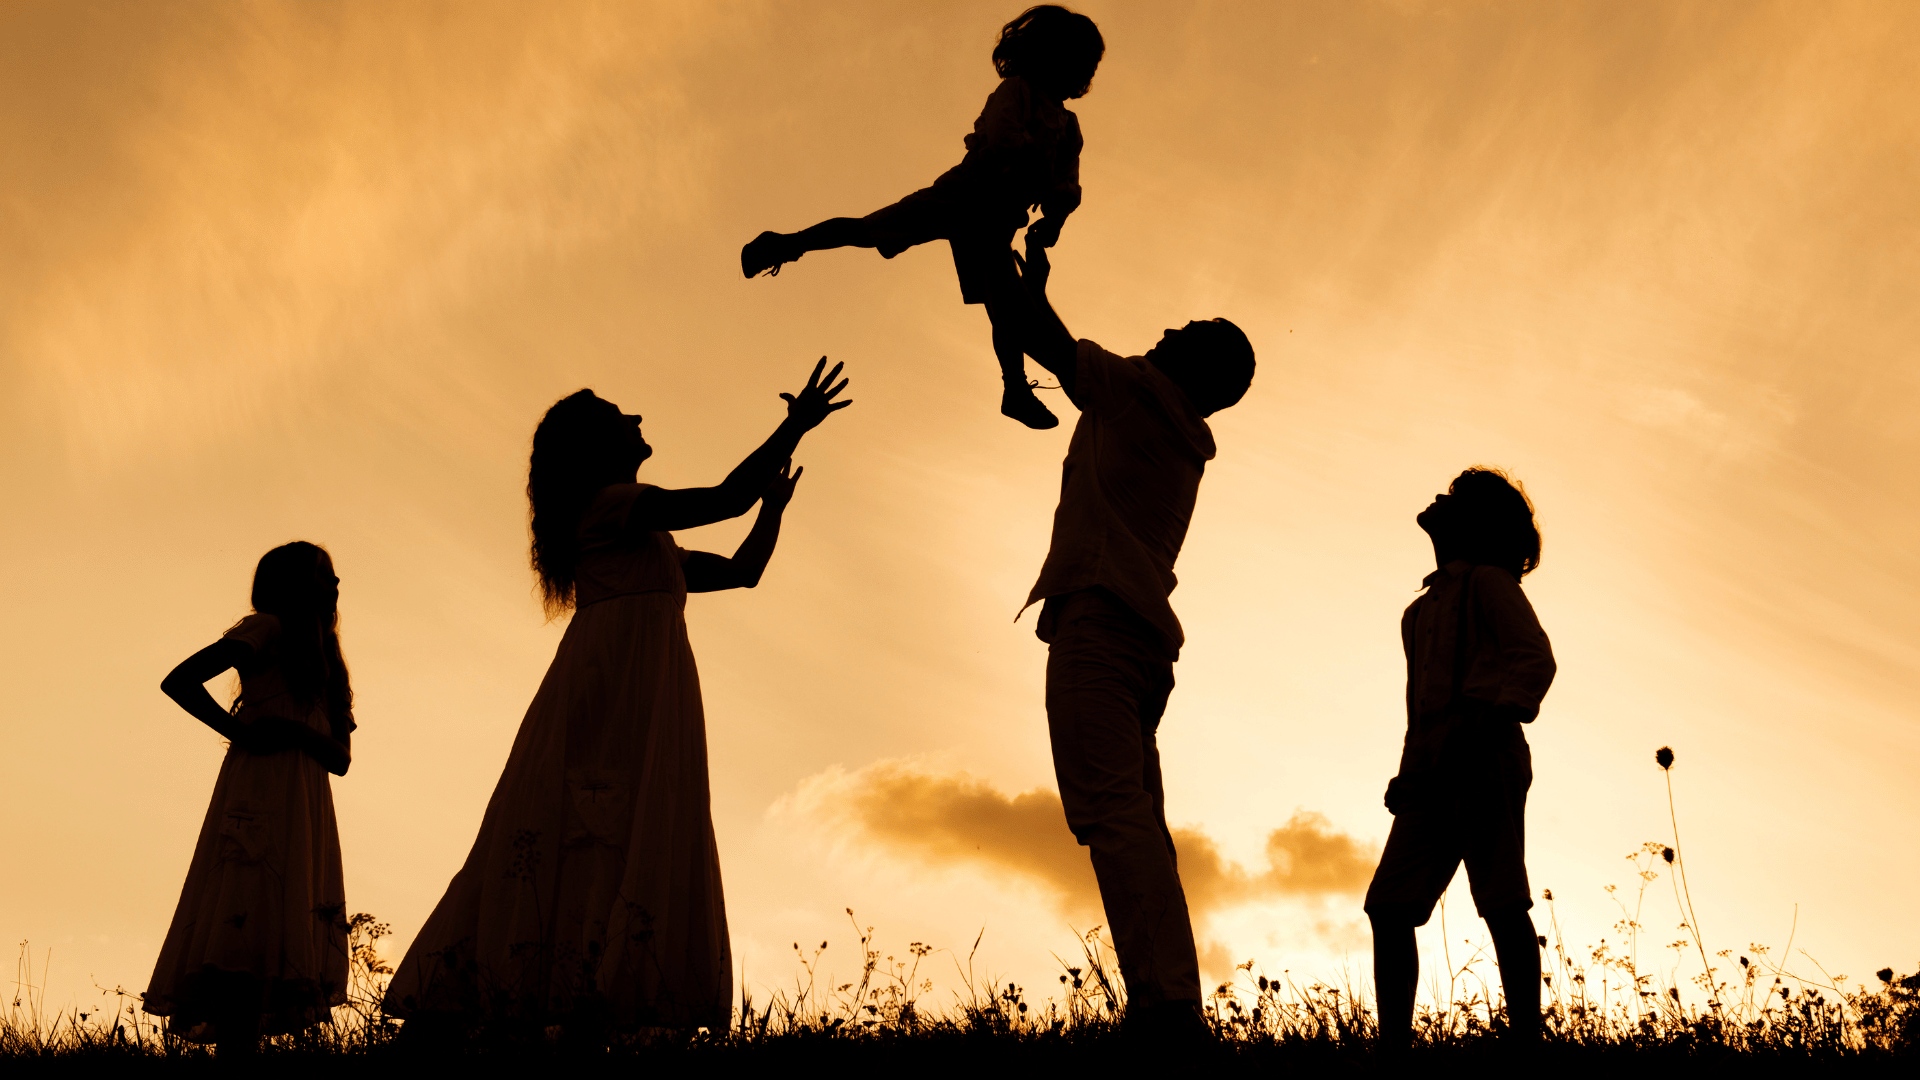 A silhouette of a family, under a bright sky, with the man holding a child high and the woman reaching ups and the other children looking up